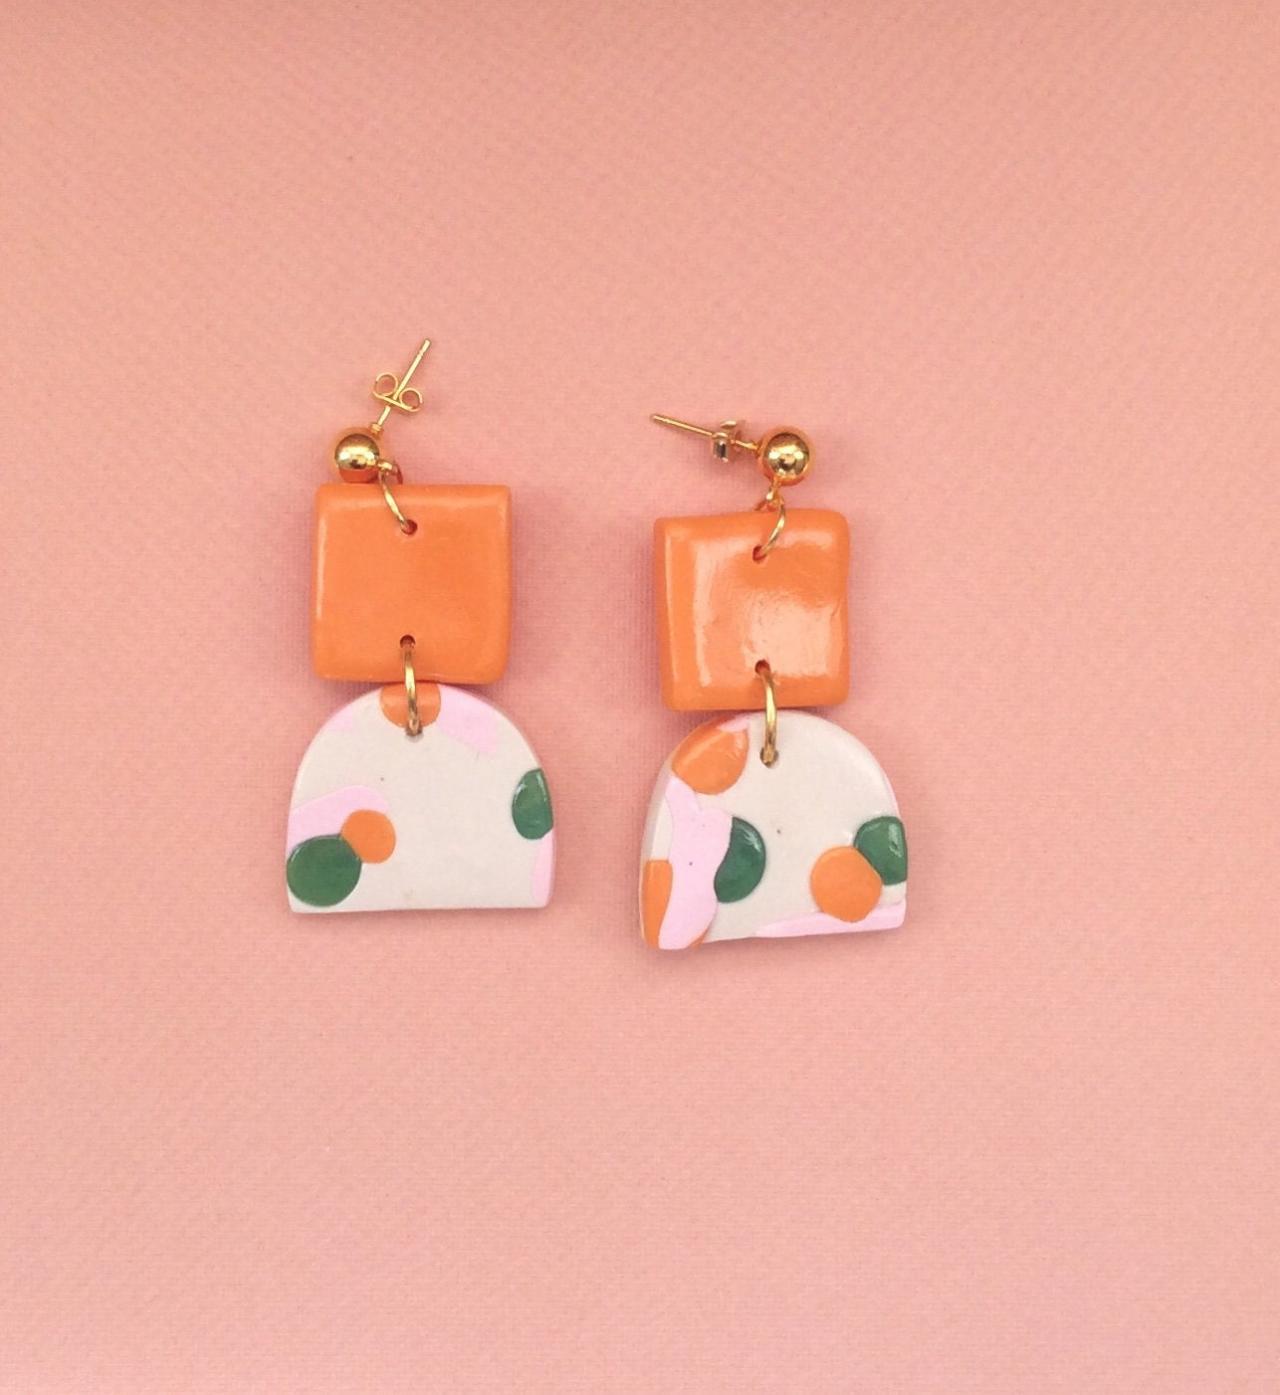 Terrazzo Solid Square Polymer Clay Drop Earrings | Simple Cute Polymer Clay Statement Earrings